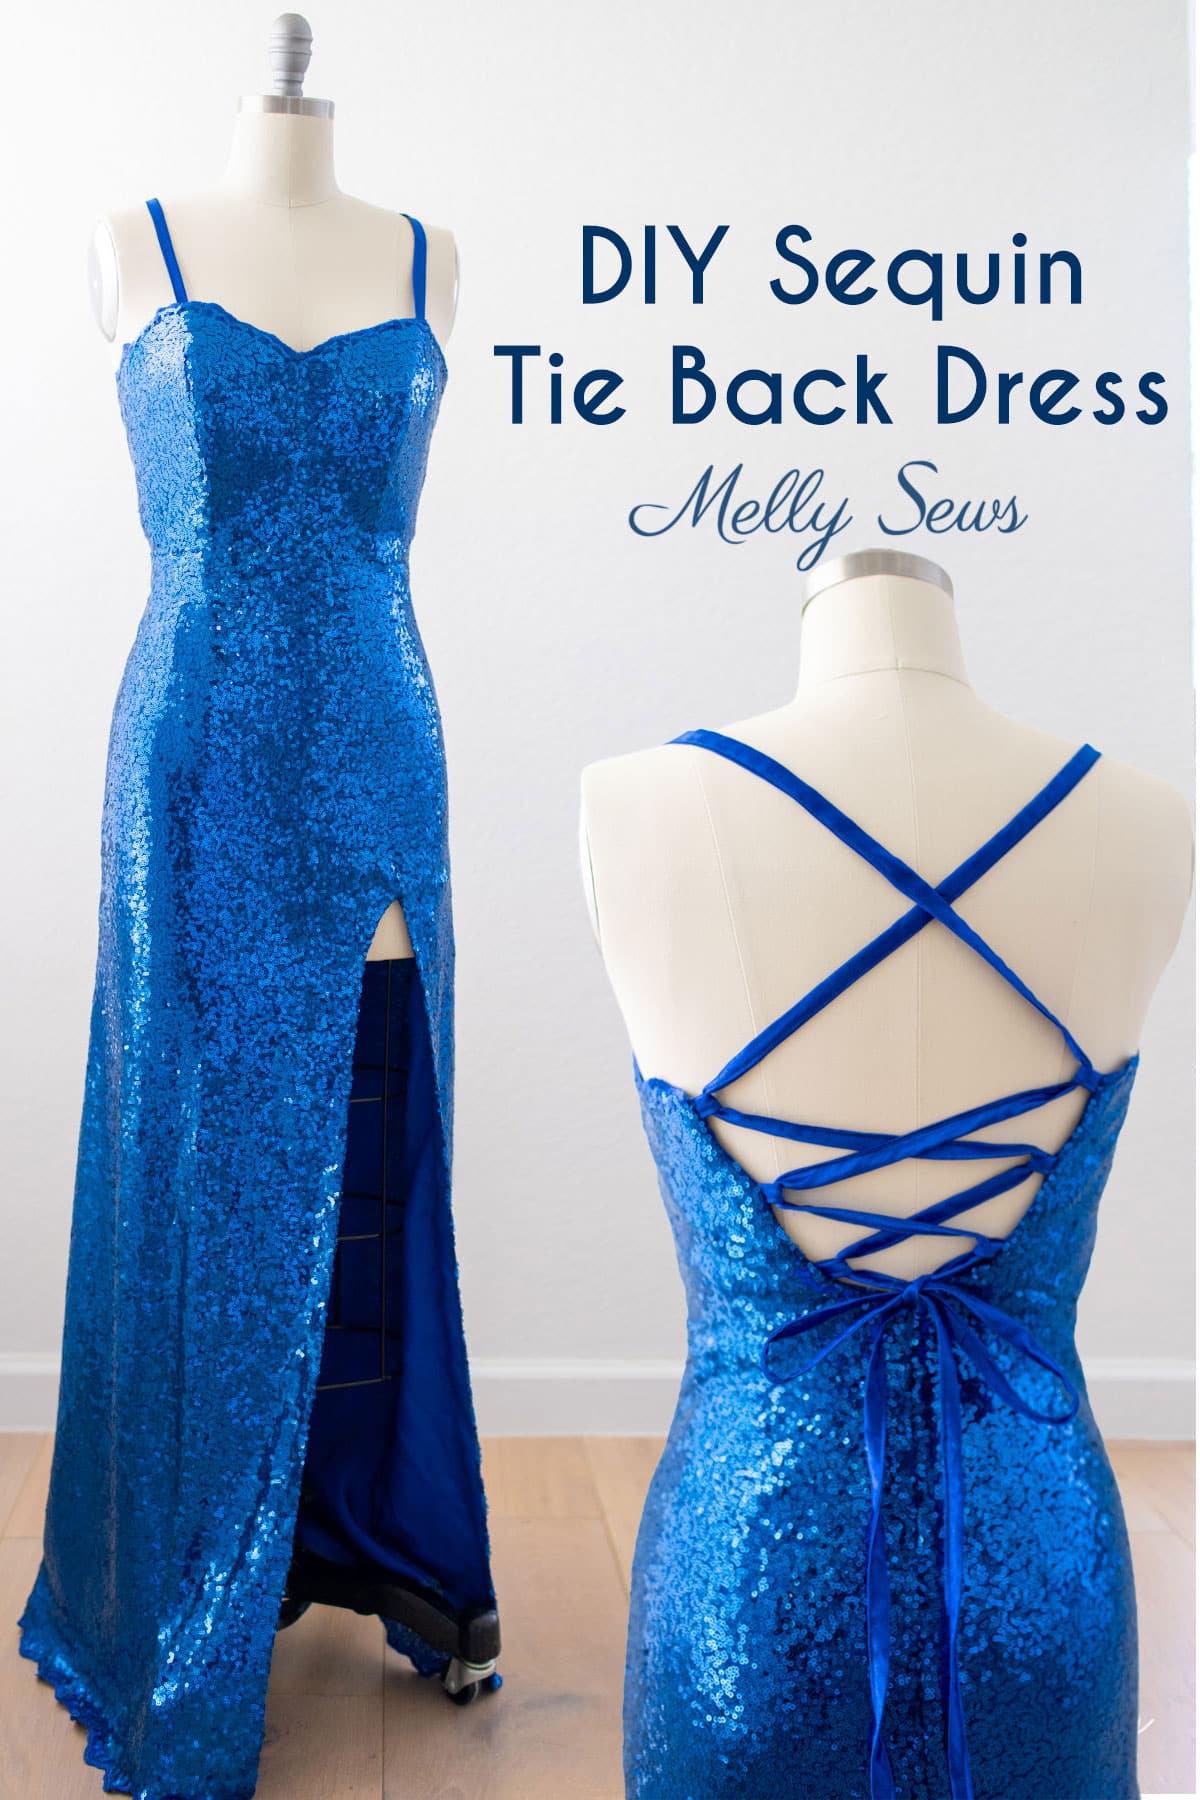 How To Sew A DIY Prom Dress with Sequins and a Tie Back - Melly Sews